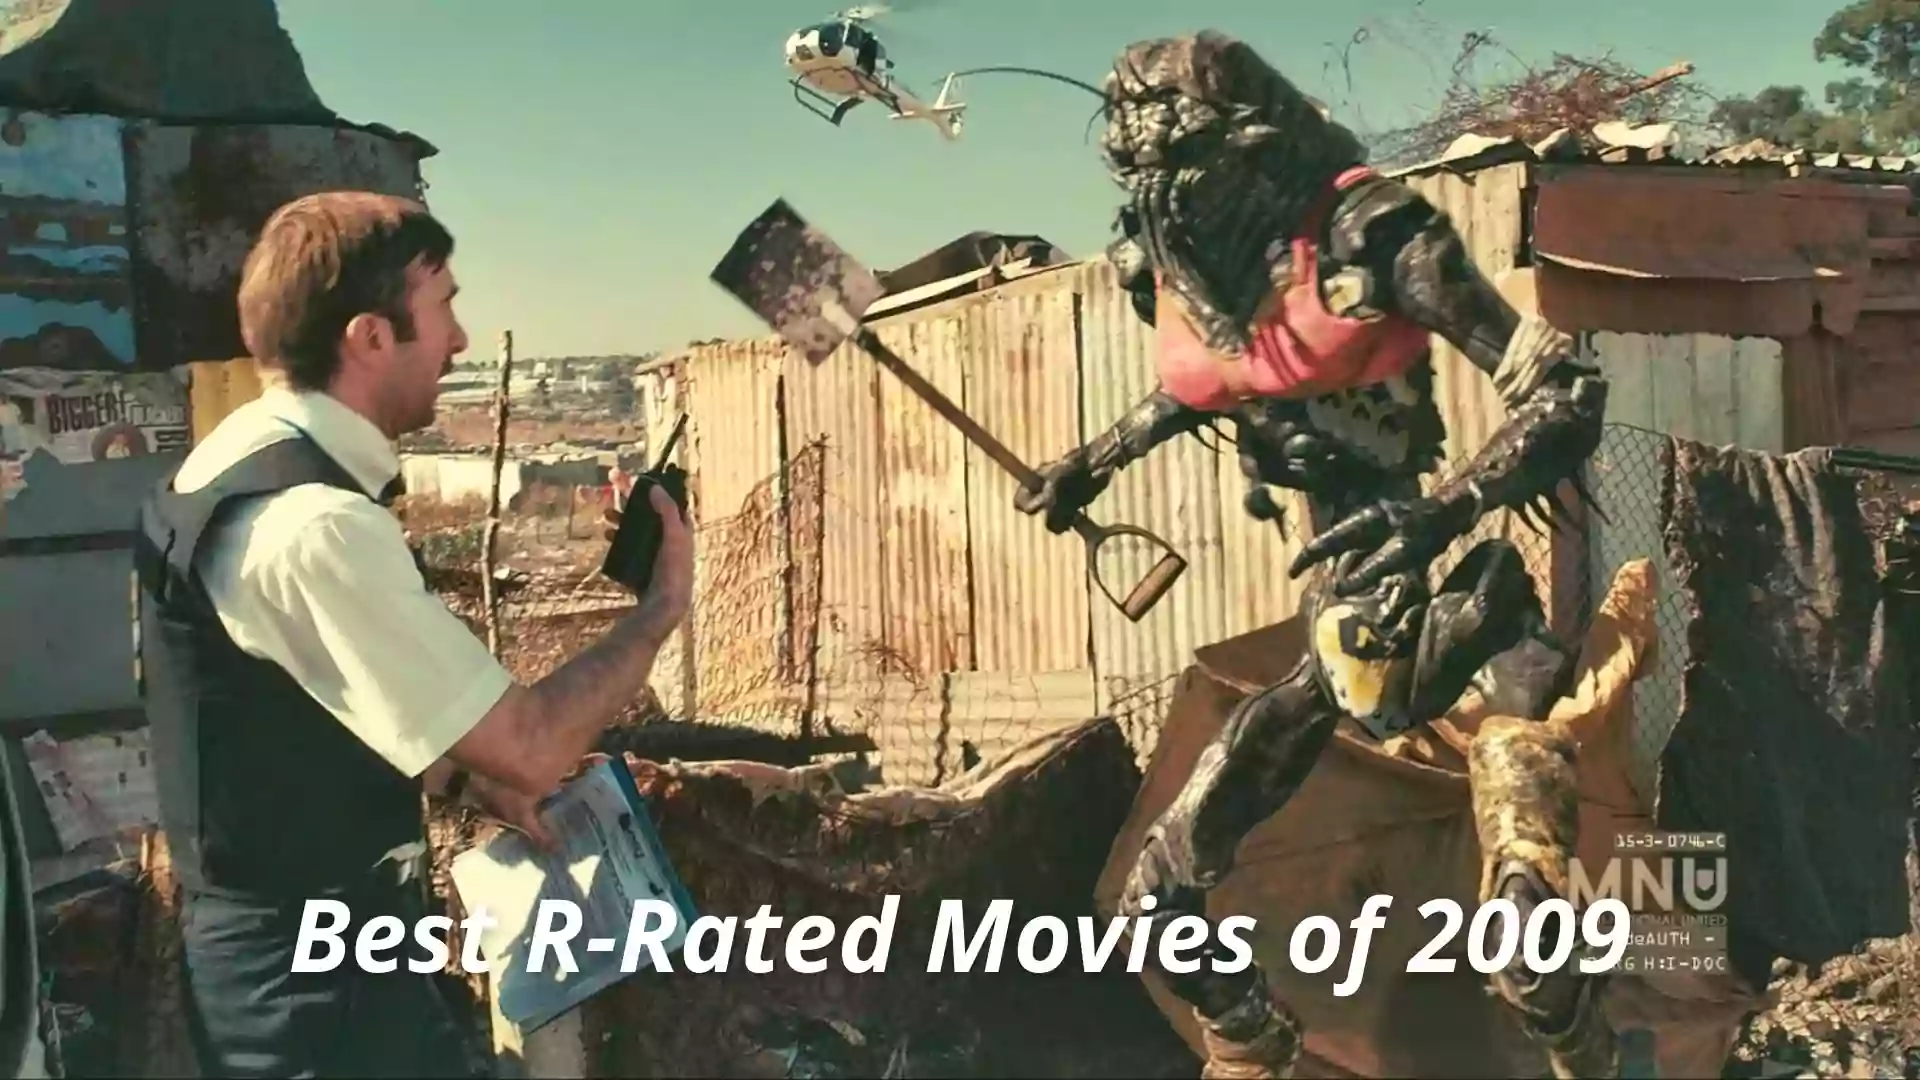 Best R-Rated Movies of 2009